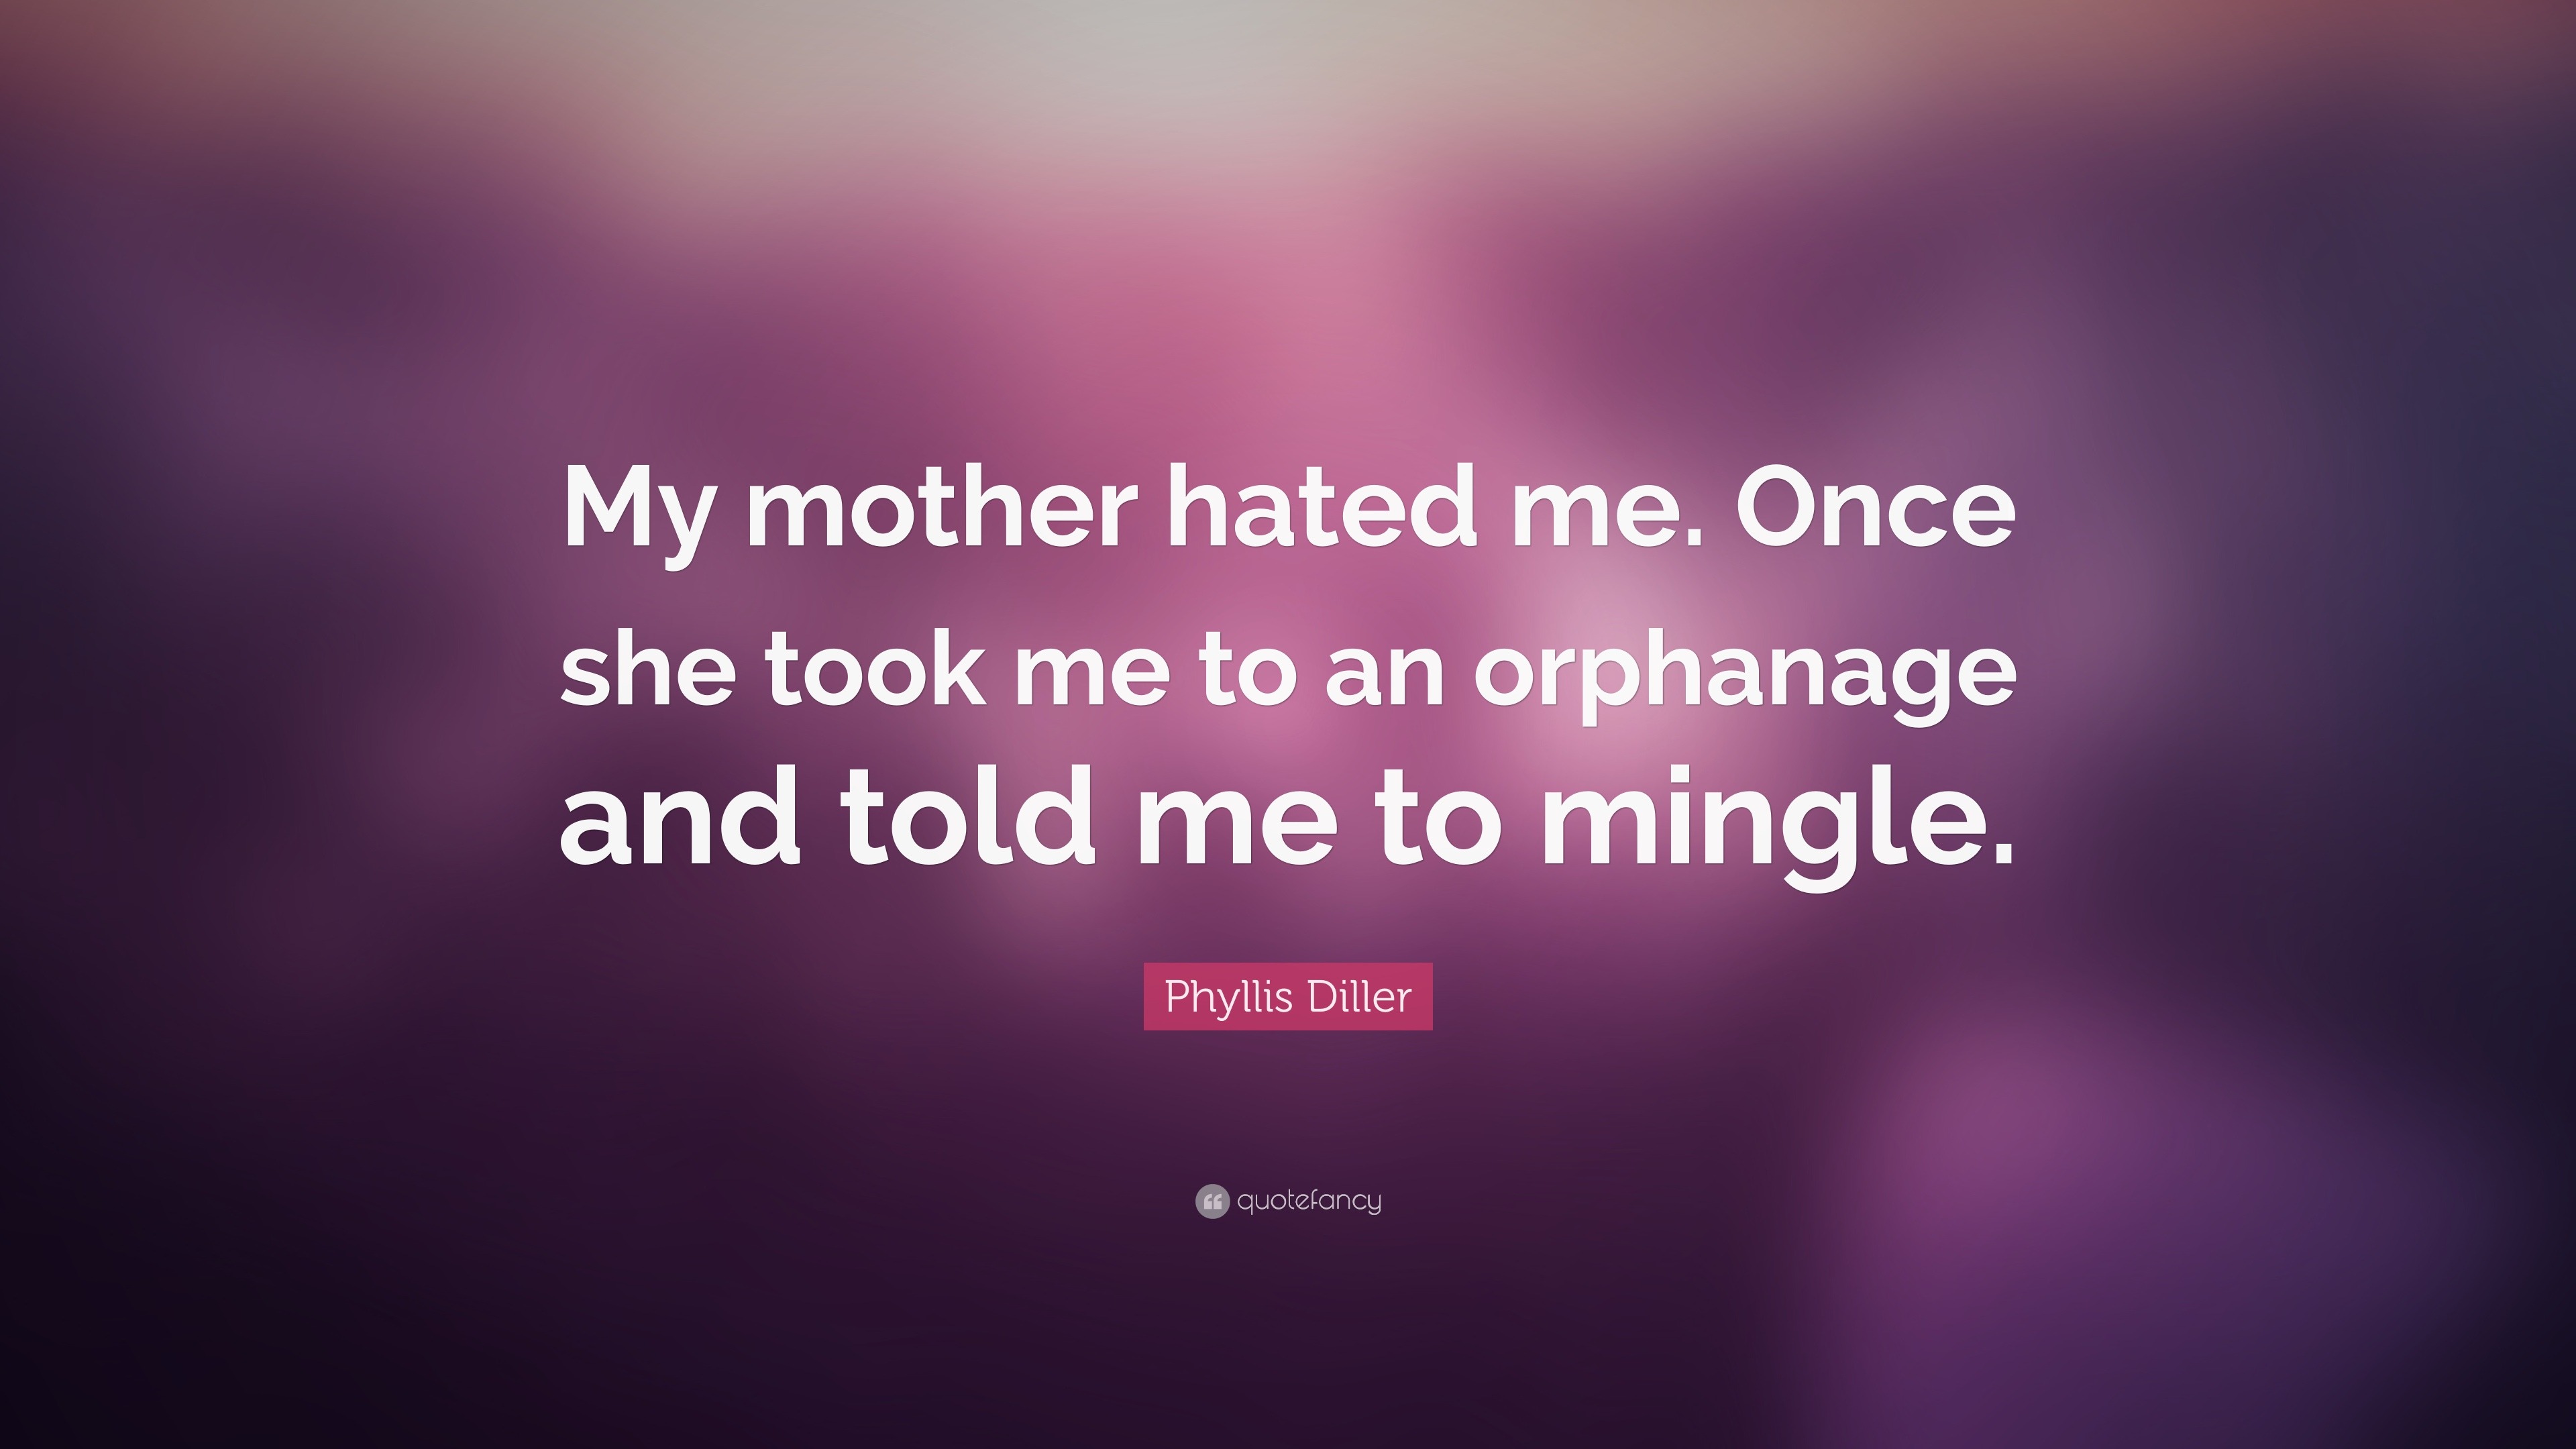 Afskrække vente Meddele Phyllis Diller Quote: “My mother hated me. Once she took me to an orphanage  and told